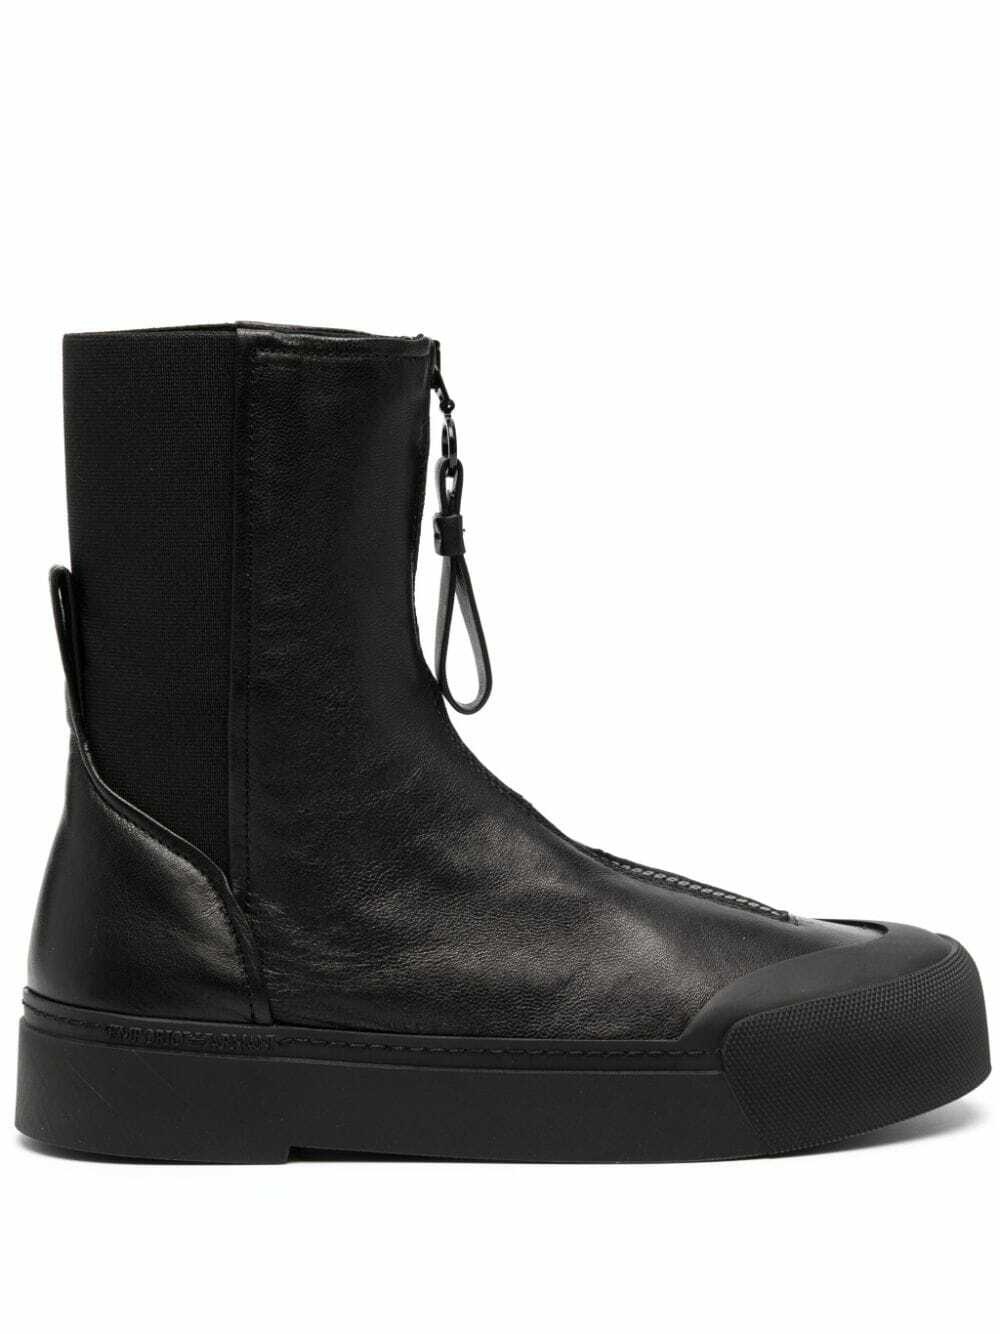 EMPORIO ARMANI - Leather Ankle Boots